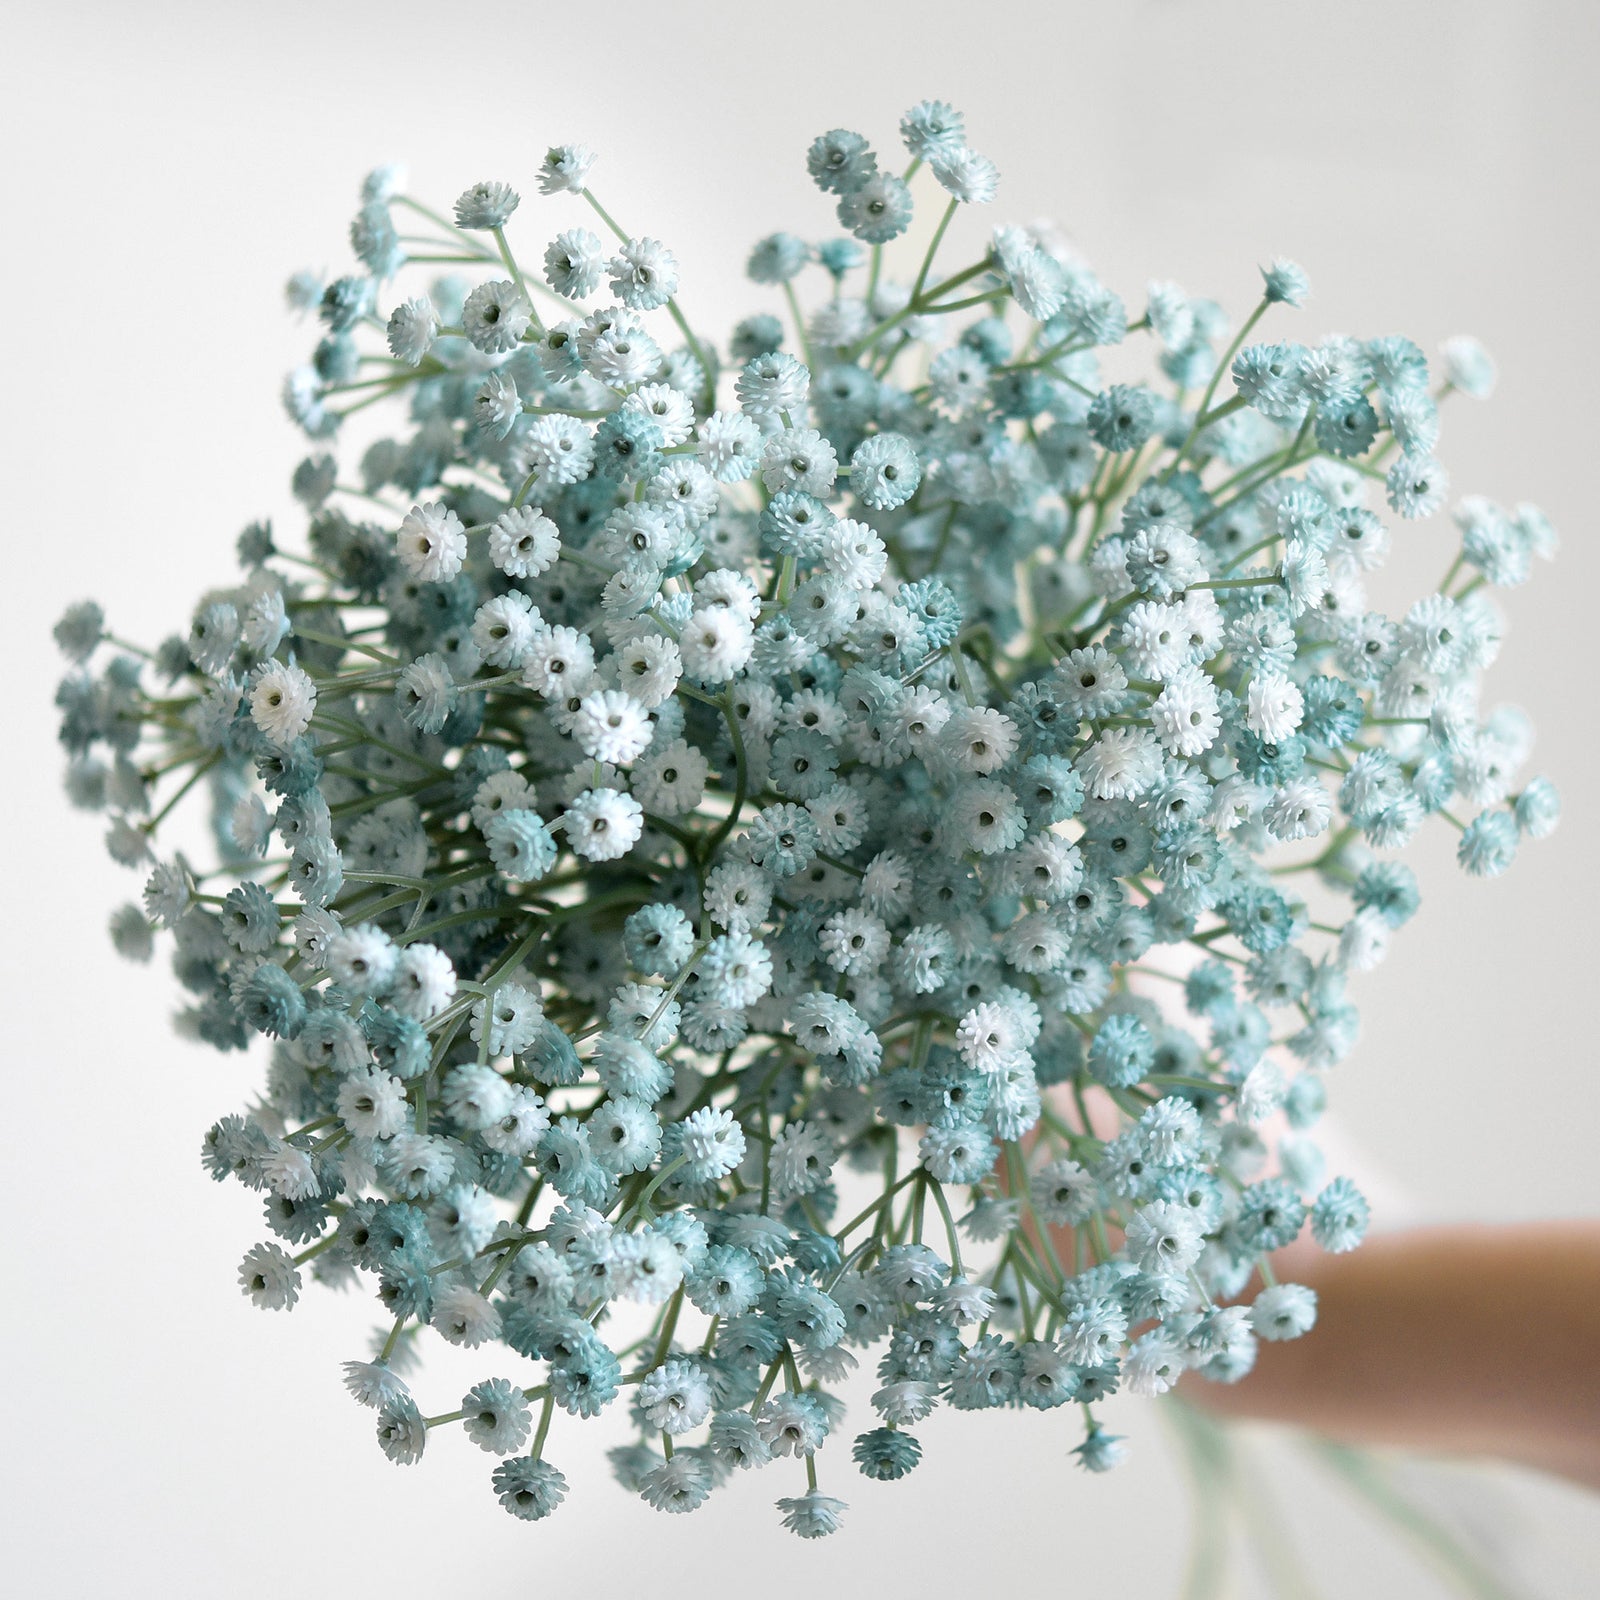 Glacier Blue Baby’s Breath Artificial Flowers Baby’s Breath Gypsophila Tall Long Stems 6 Stems 69cm(2.3ft) Softer Material